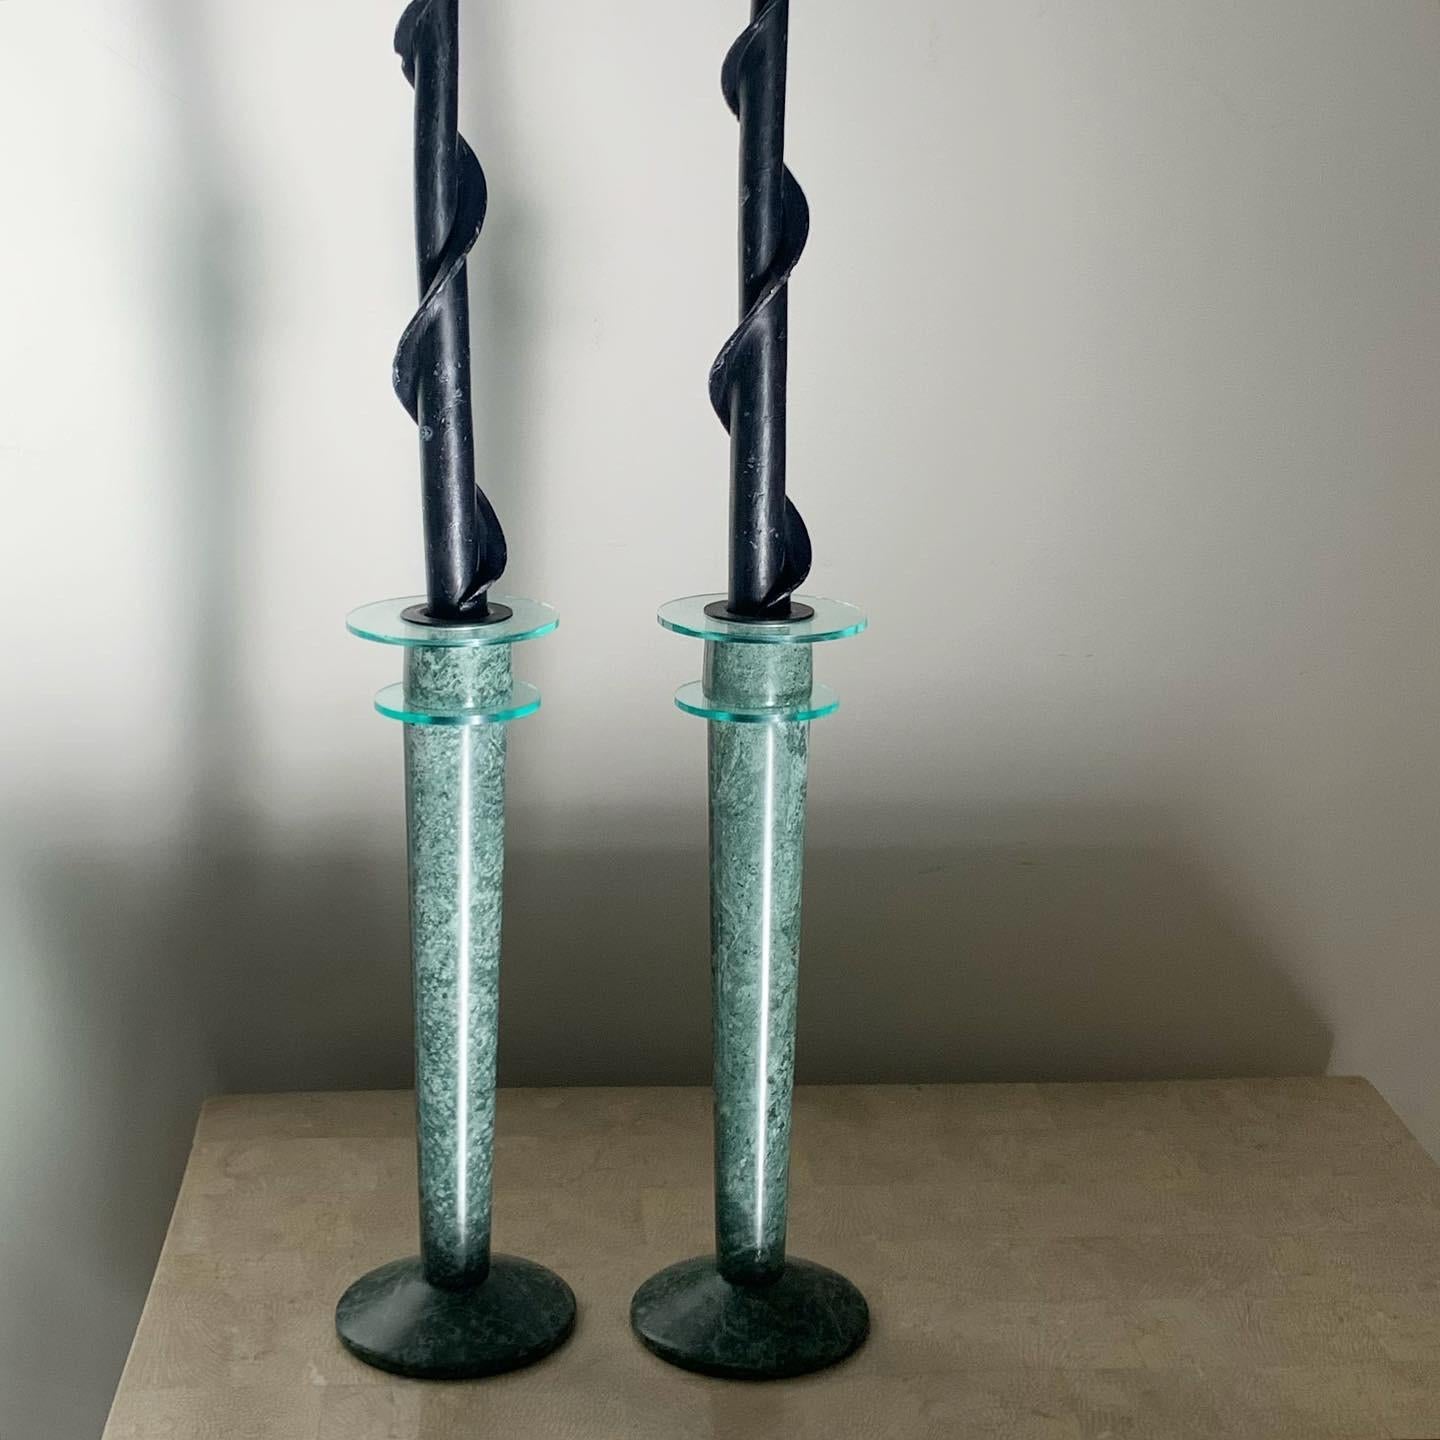 A pair of postmodern marble and lucite candlesticks circa 1980s. Pick up in south west Los Angeles or we ship worldwide. 
11” tall X 3.5” diameter base.